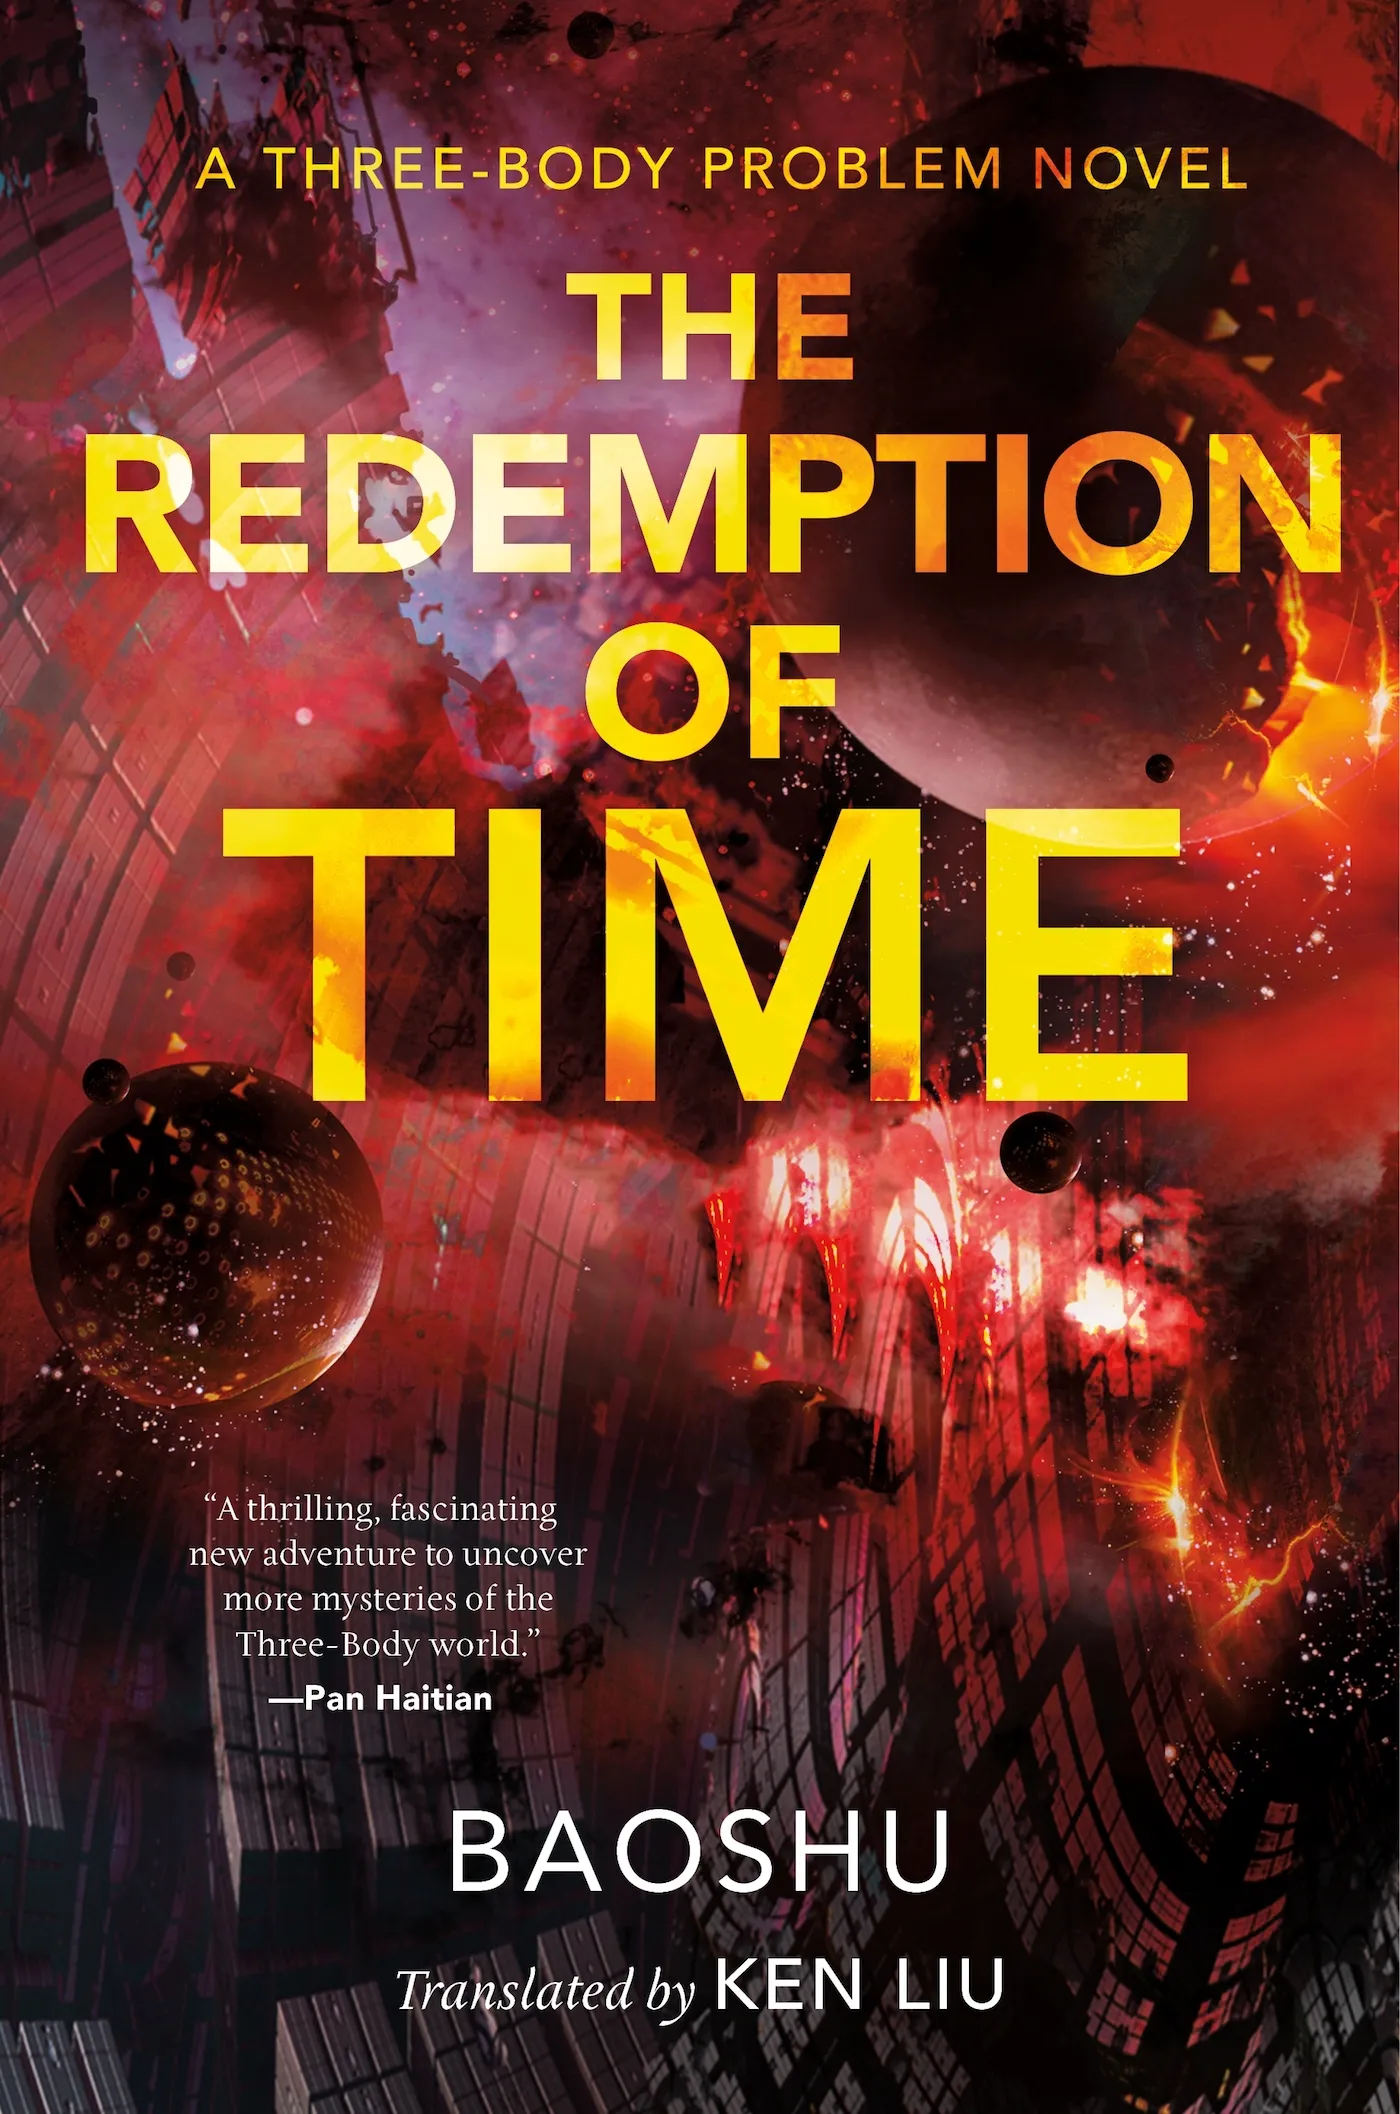 The Redemption of Time (The Three-Body Problem #4)